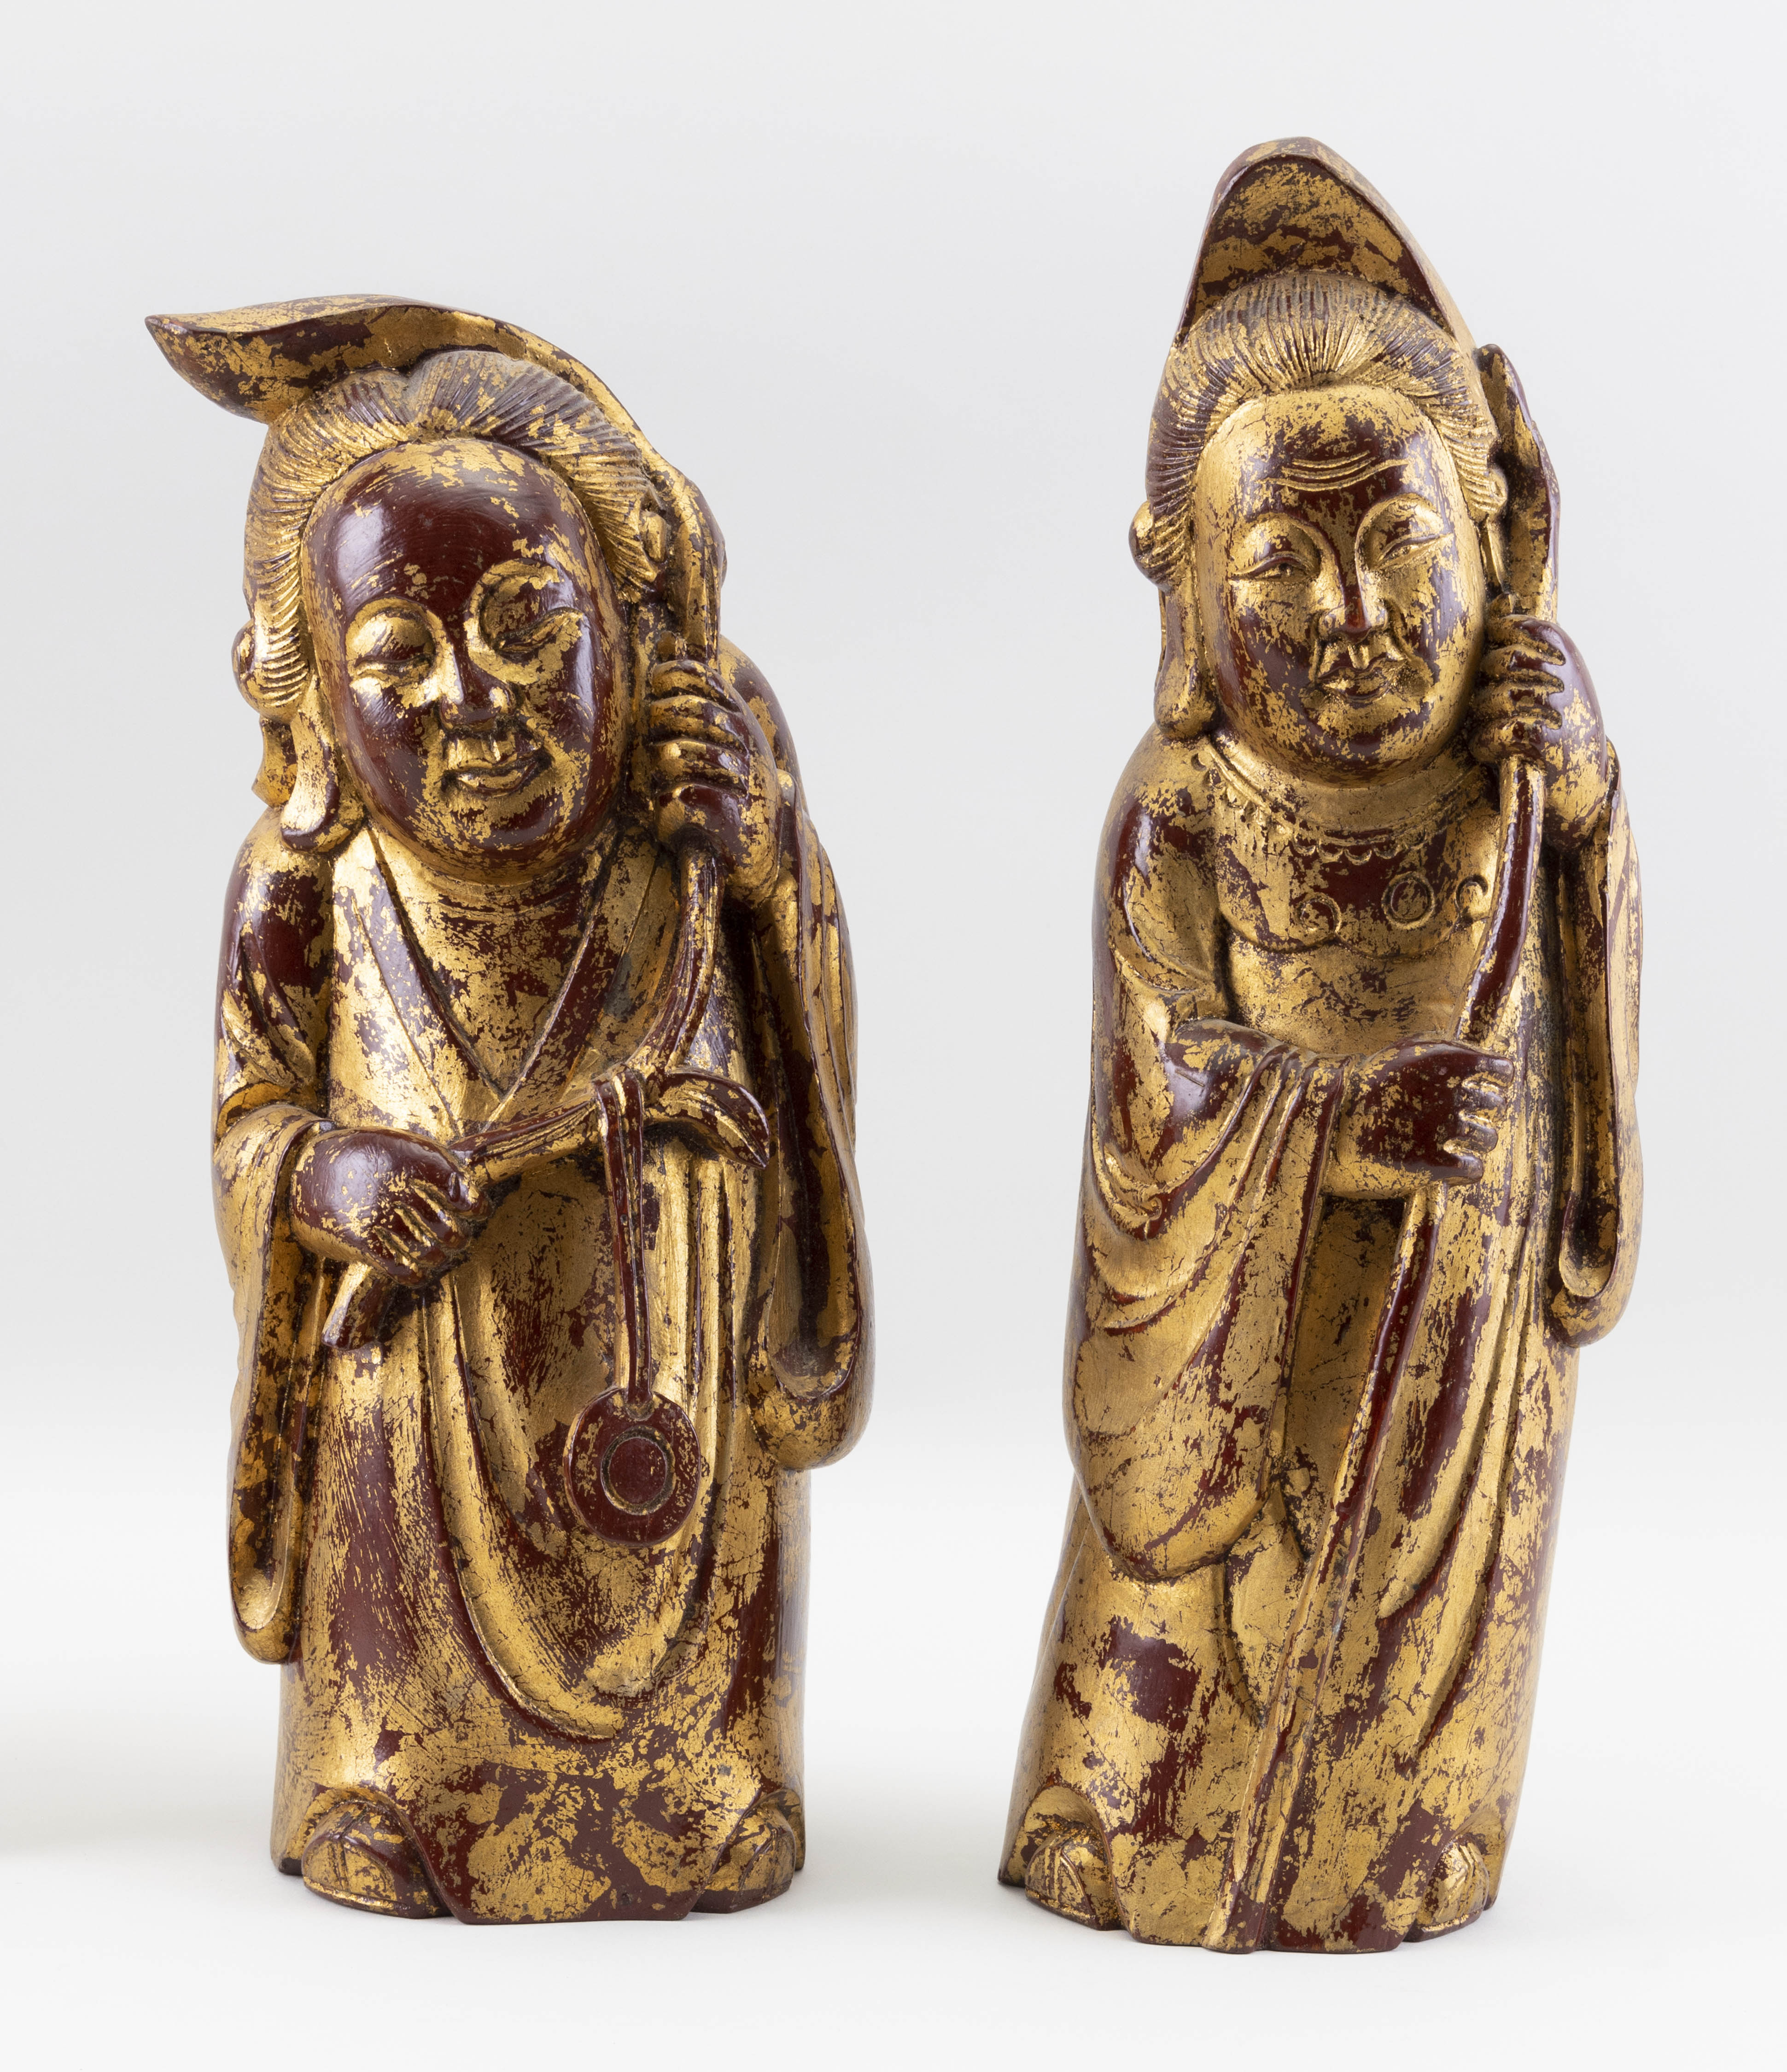 PAIR OF CHINESE RED AND GILT LACQUERED WOOD DEITY FIGURES Early 20th Century Heights 12